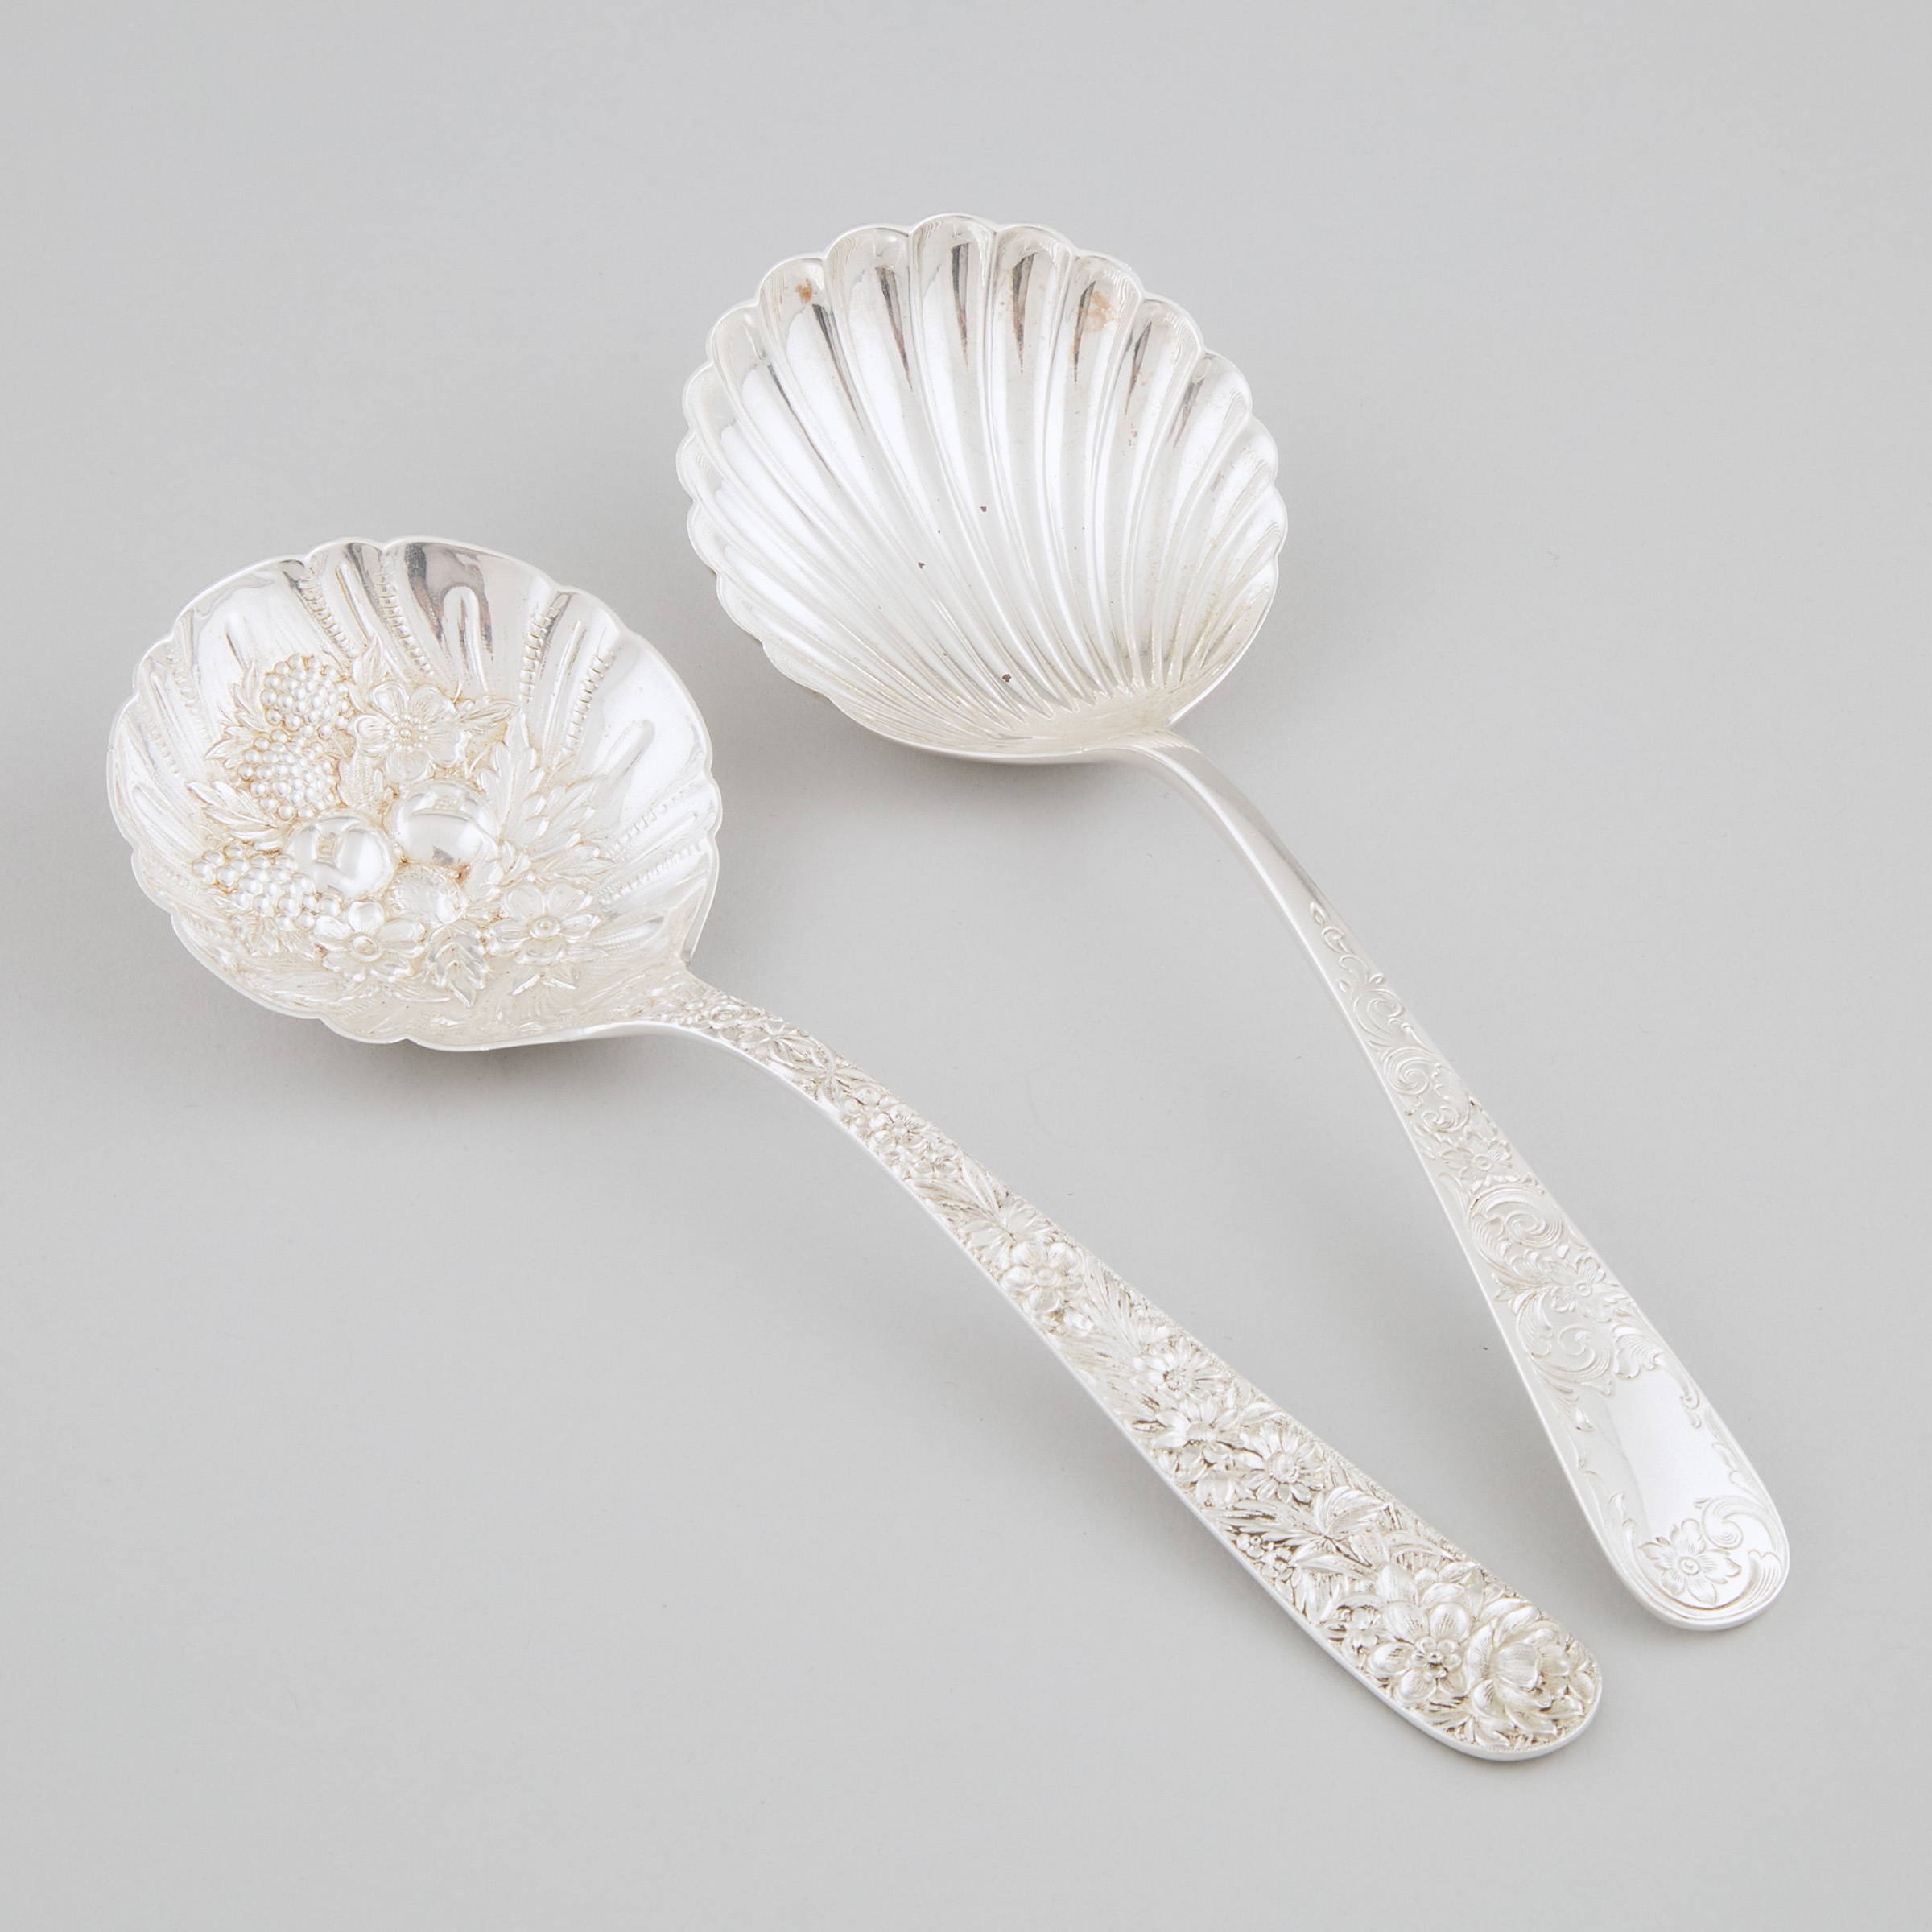 Two American Silver 'Repoussé' and Shell Form Serving Spoons, Samuel Kirk & Son, Baltimore, Md., early 20th century